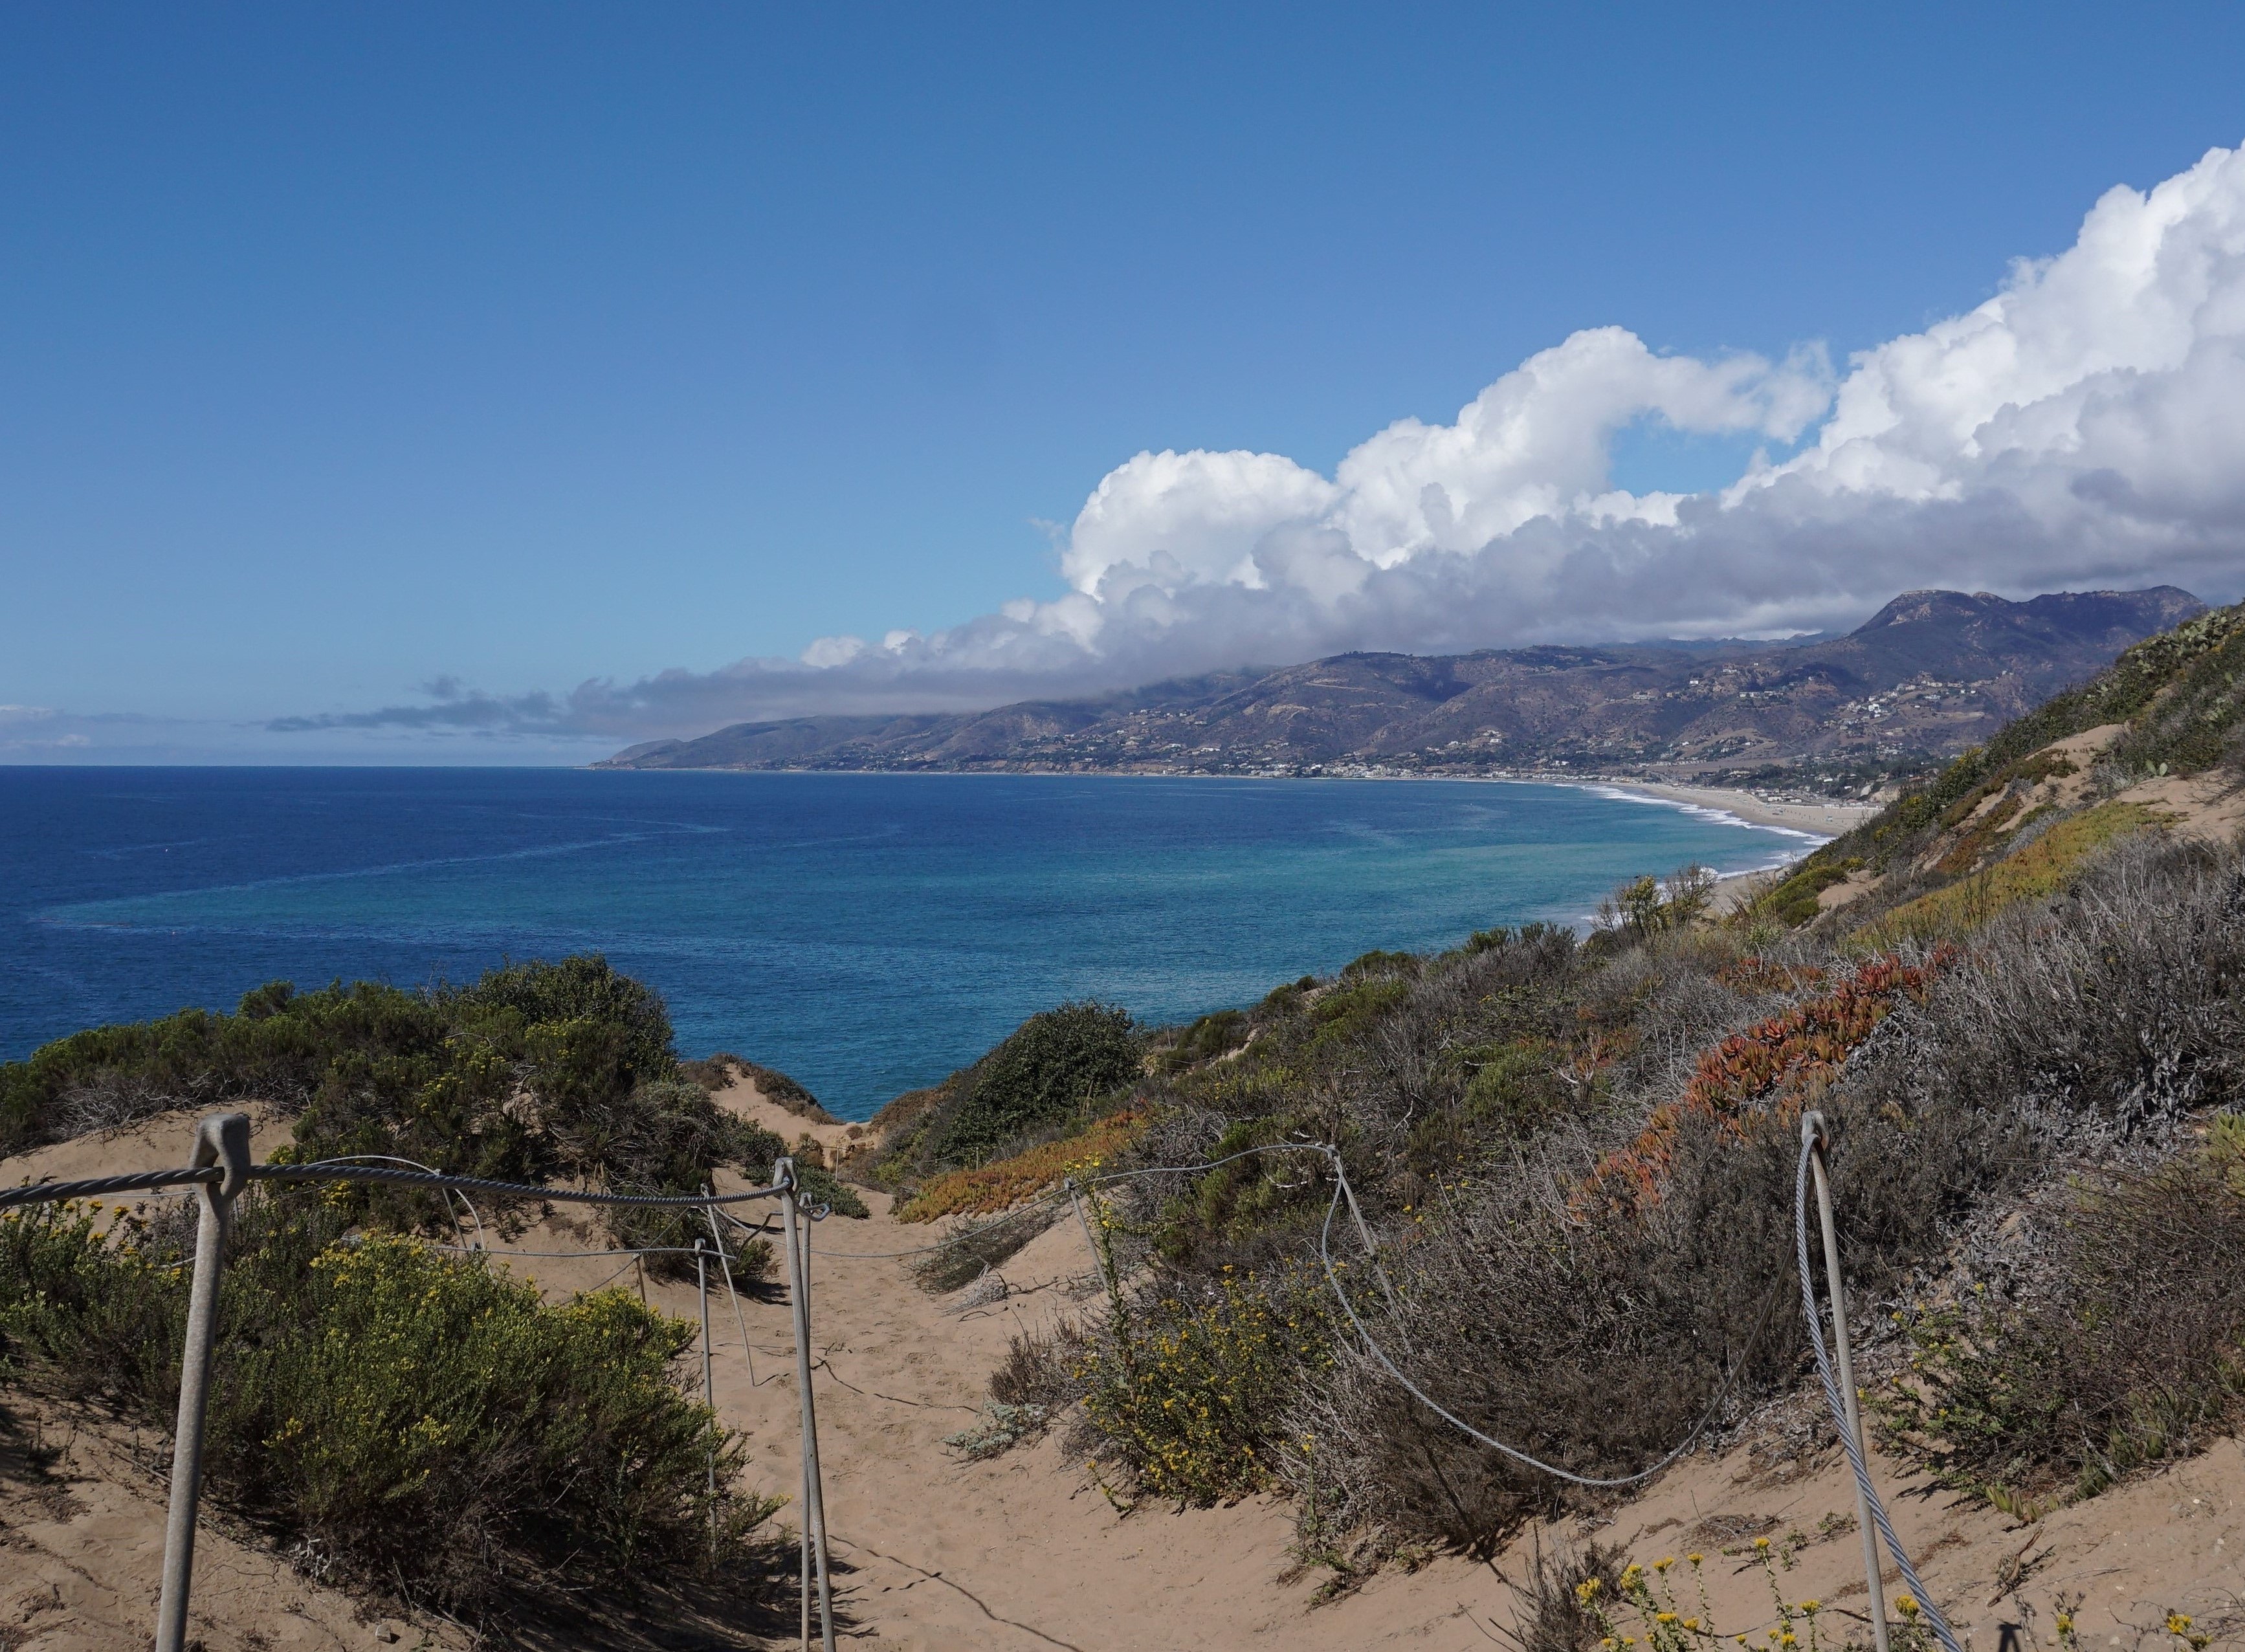 Point Dume State Park has many winding trails to follow along on as each one provides a view of the ocean. Hidden below over the cliffs you may be able to get a glimpse of sea lions sunbathing.